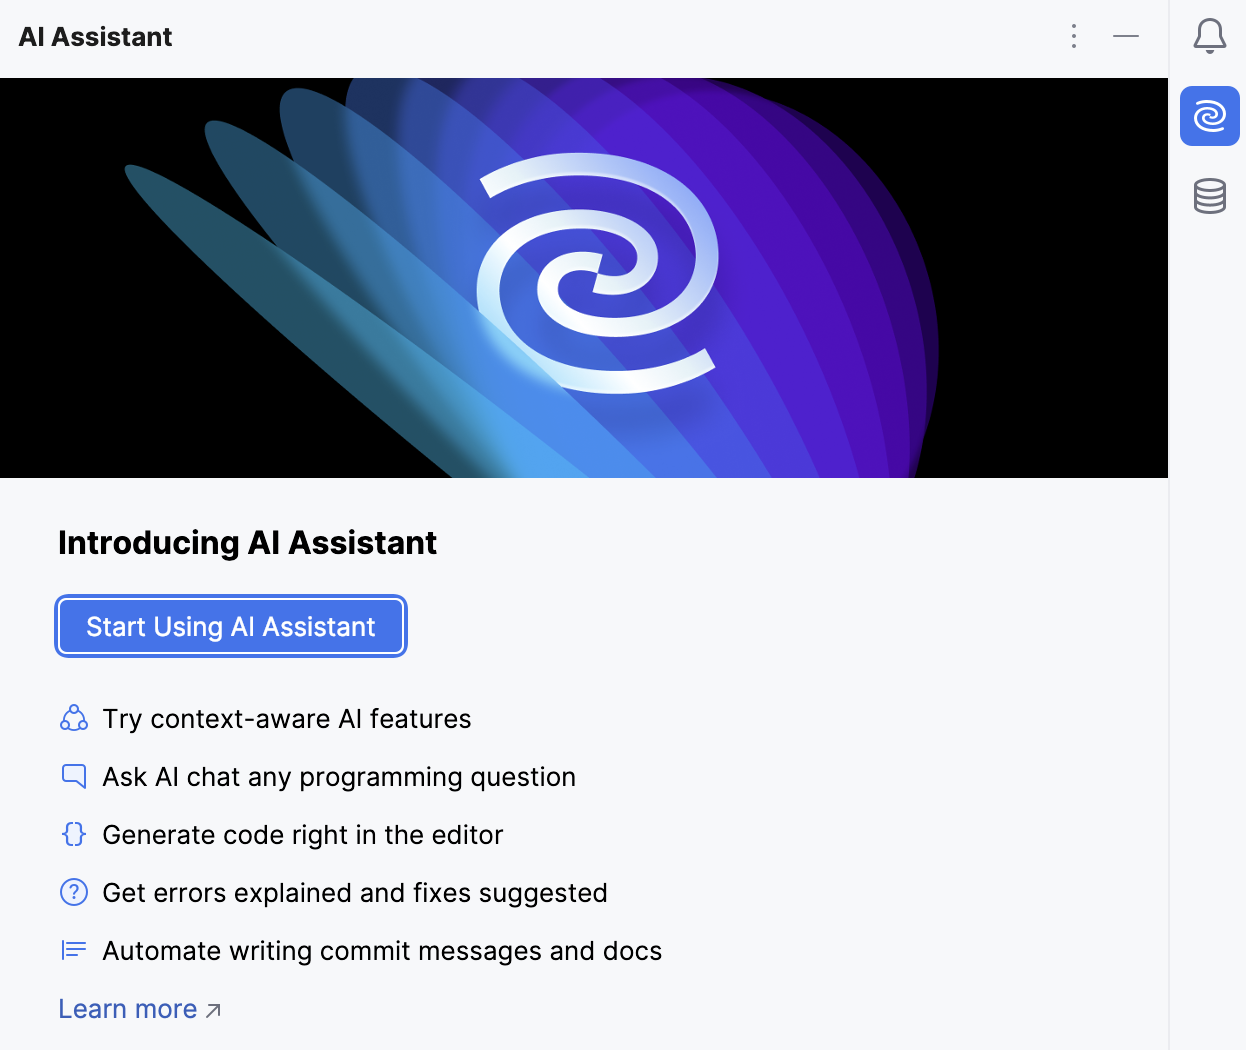 Start using AI Assistant